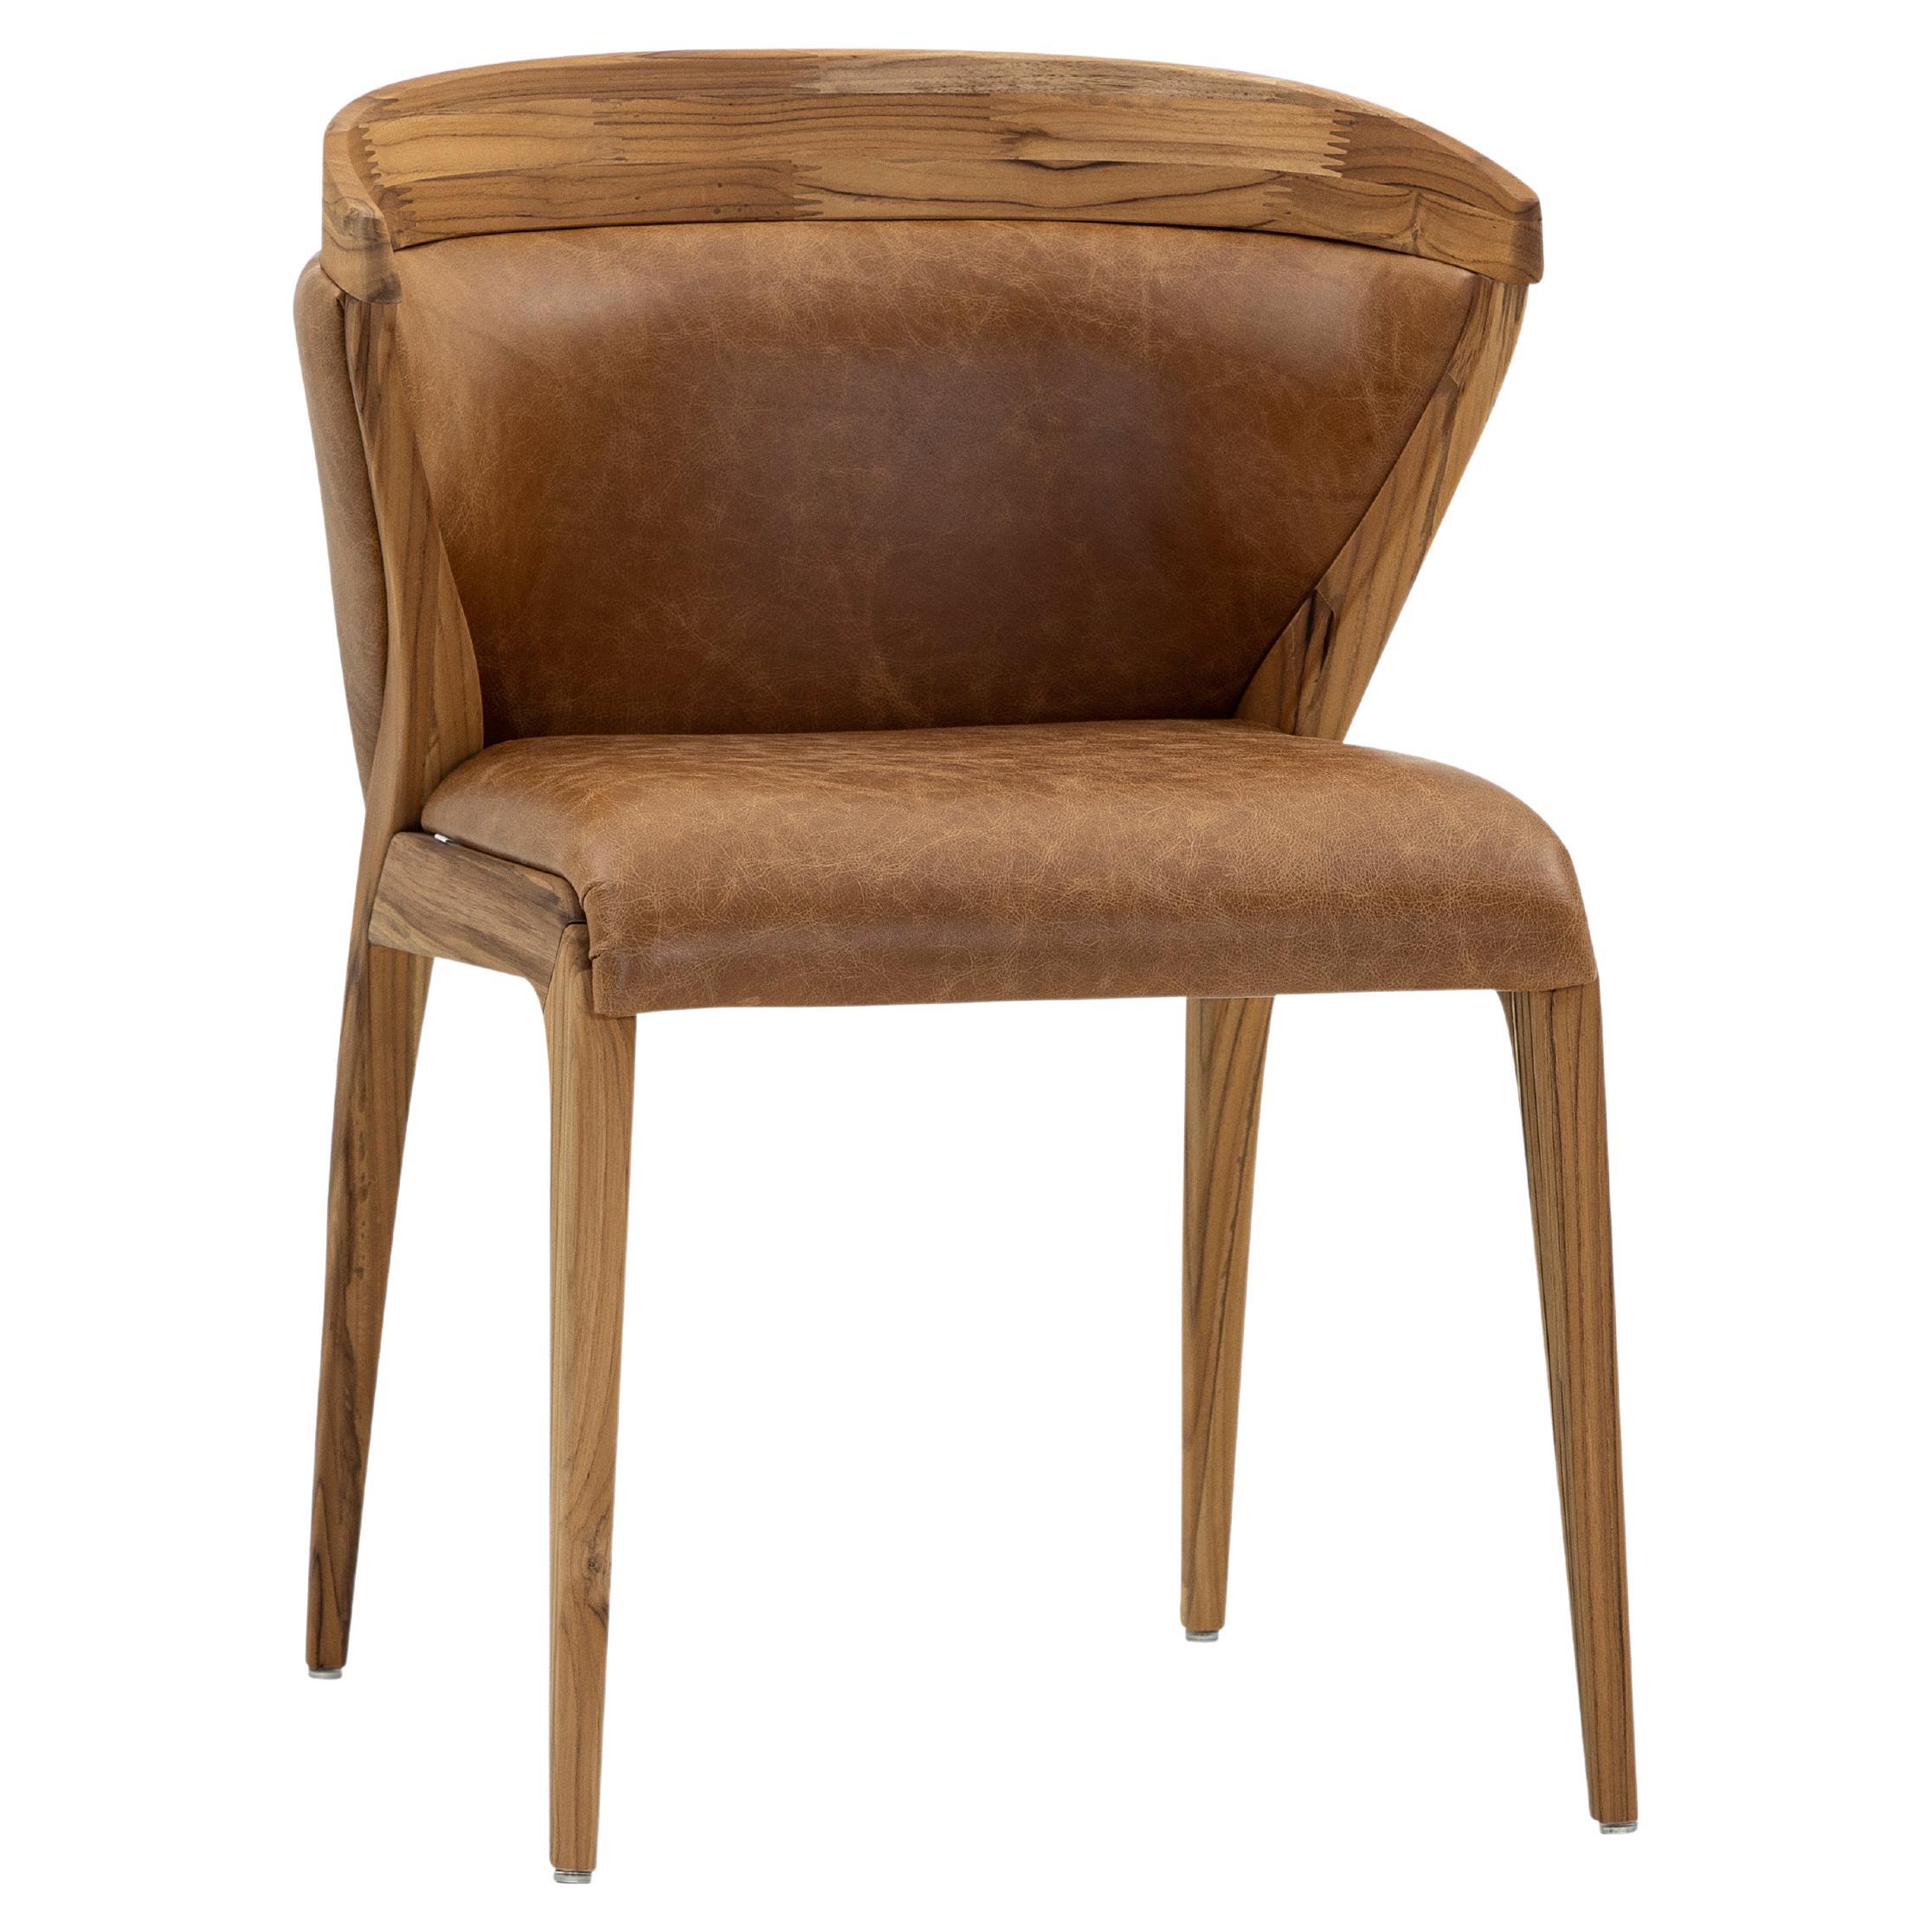 Mat Dining Chair in Teak Wood Finish, Upholstered Back and Brown Leather Seat